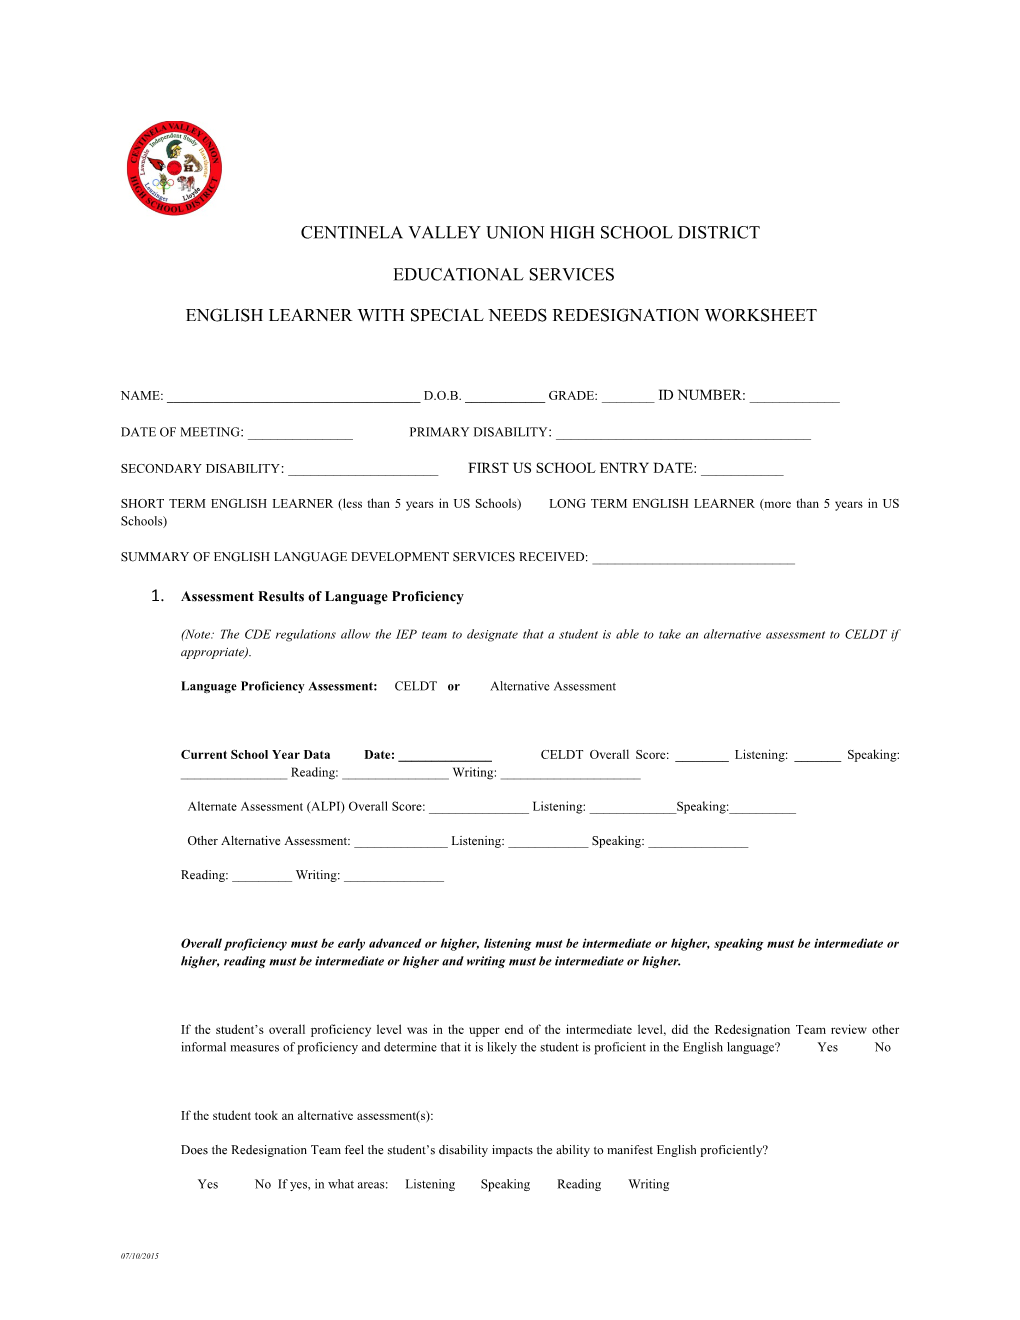 English Learner with Special Needs Redesignation Worksheet